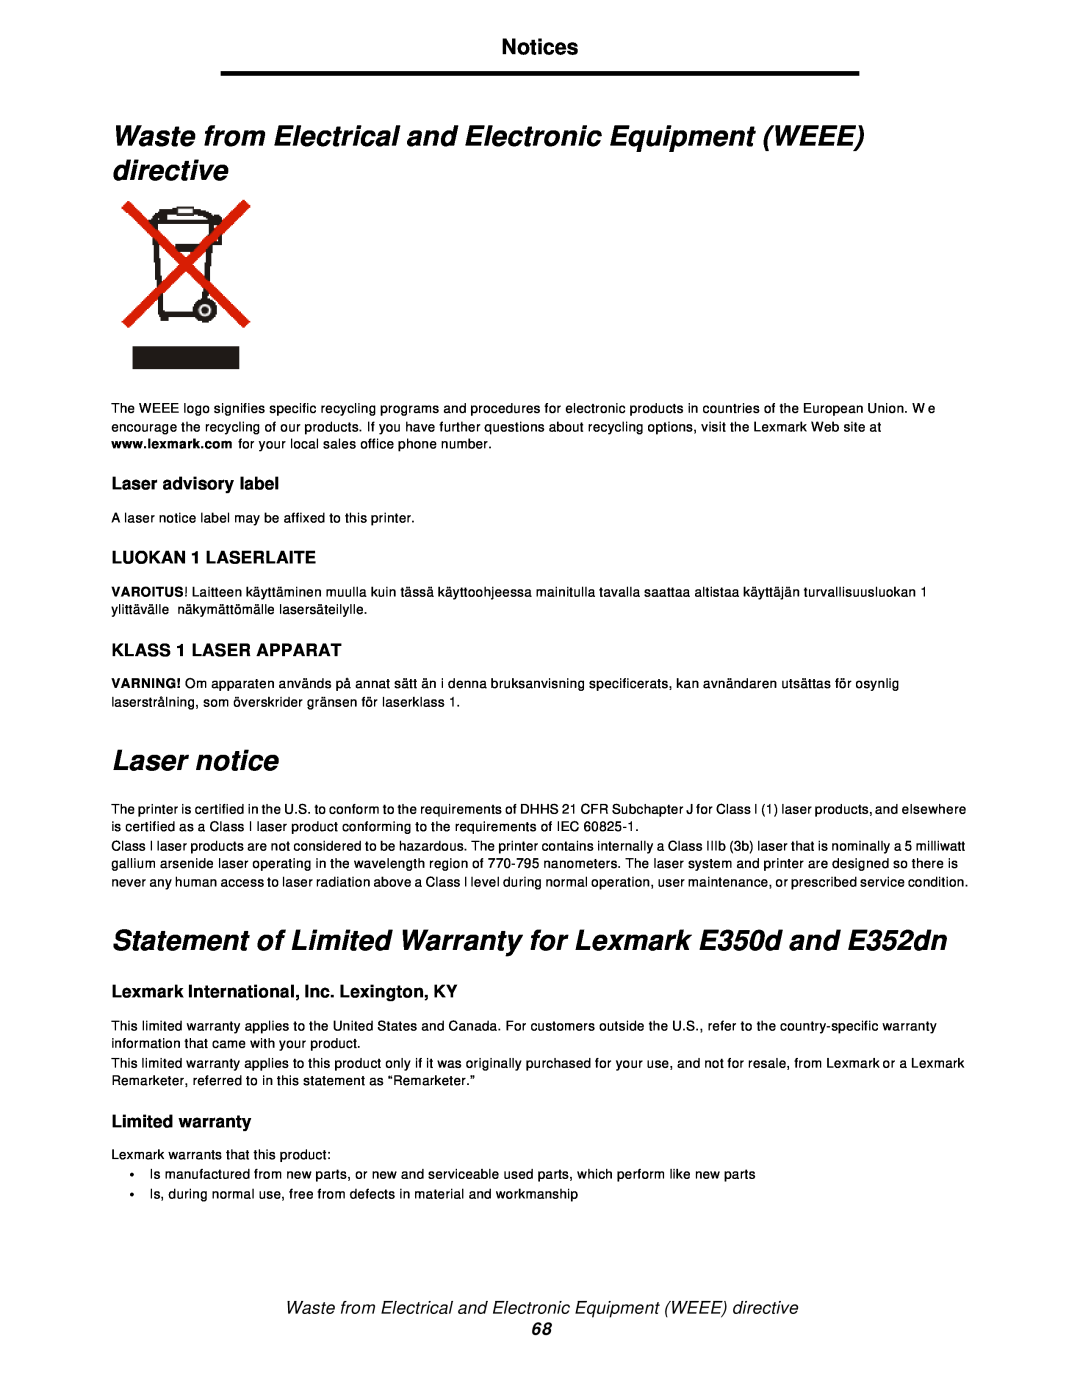 Lexmark 350d Waste from Electrical and Electronic Equipment WEEE directive, Laser notice, Laser advisory label, Notices 